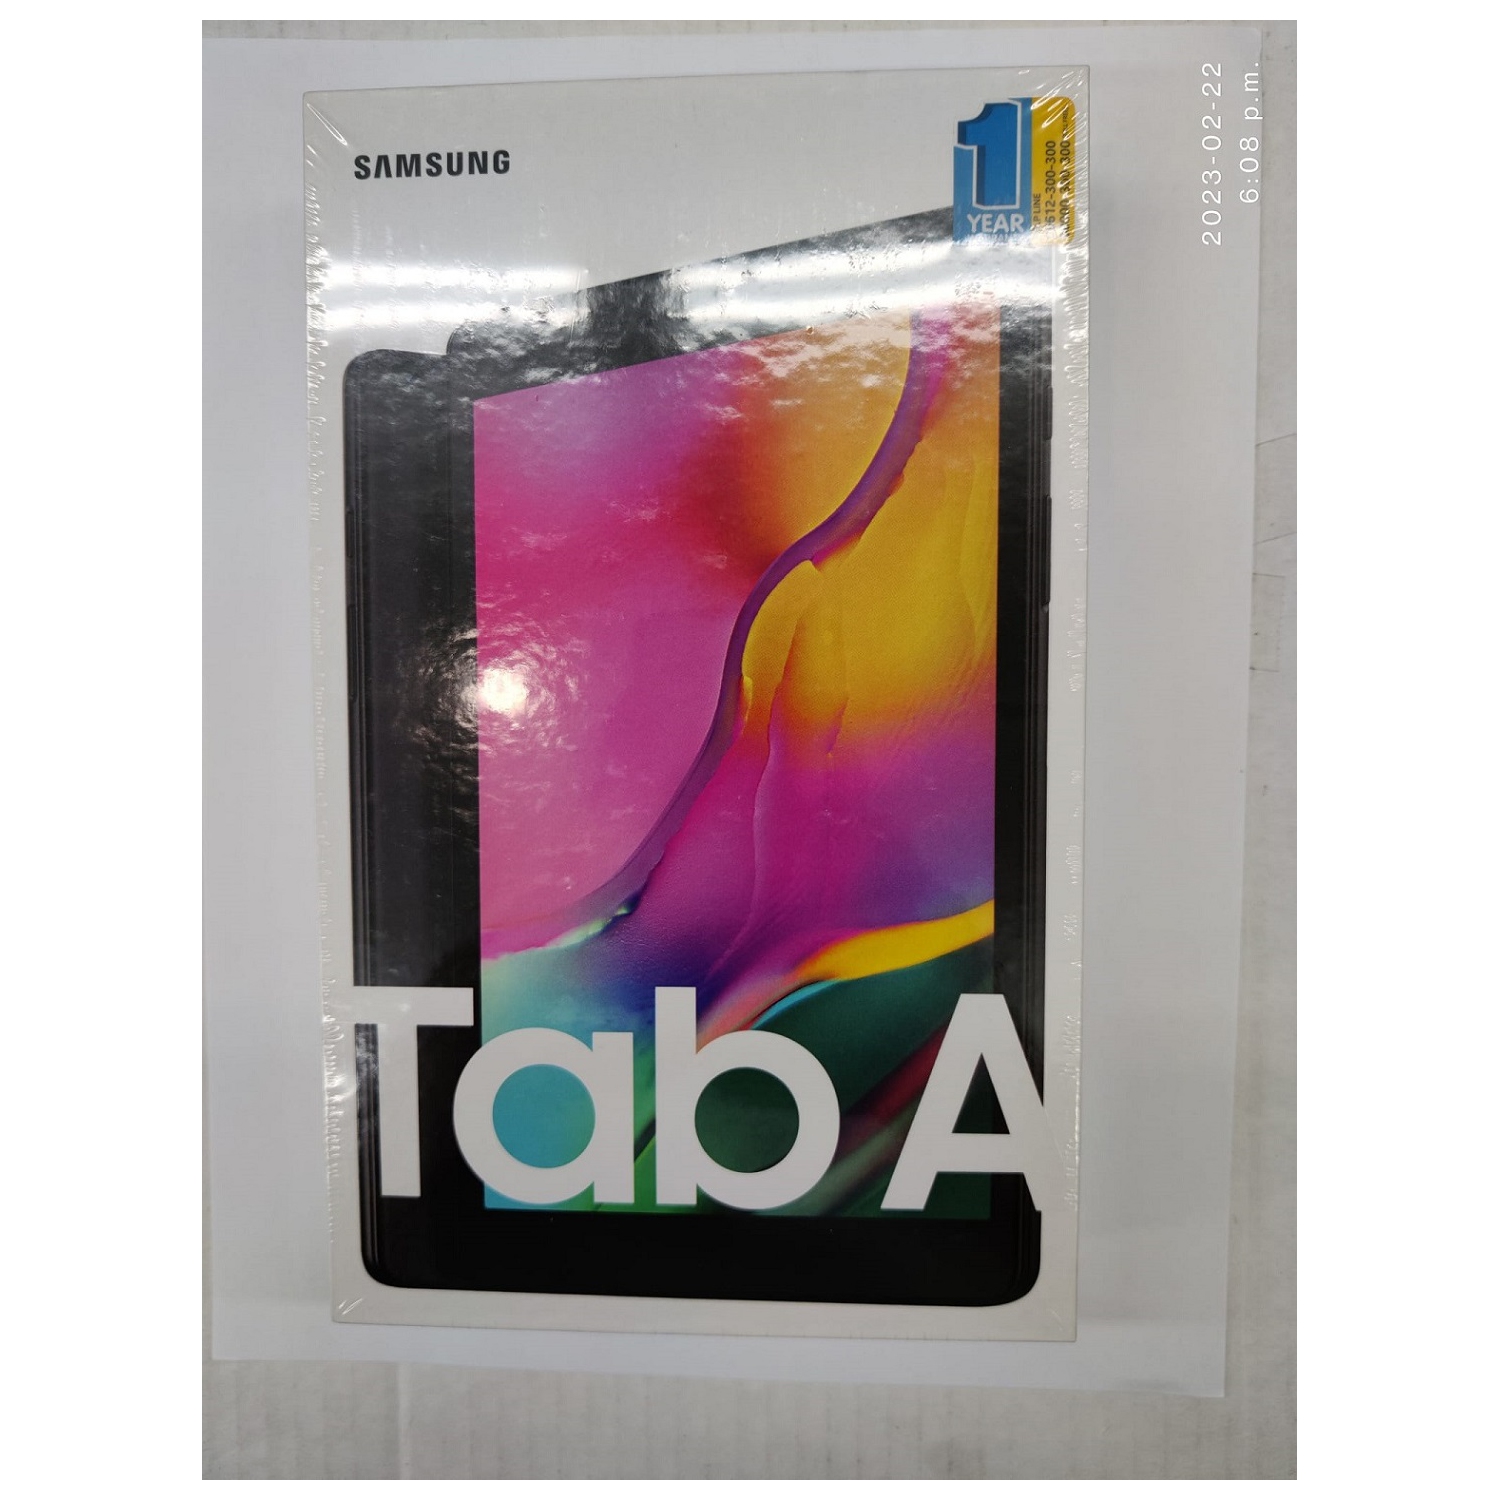 Tablette SAMSUNG Galaxy TabA 2019, Wifi, 4G LTE, 32Go, 8.0, Android, Noir  ALL WHAT OFFICE NEEDS